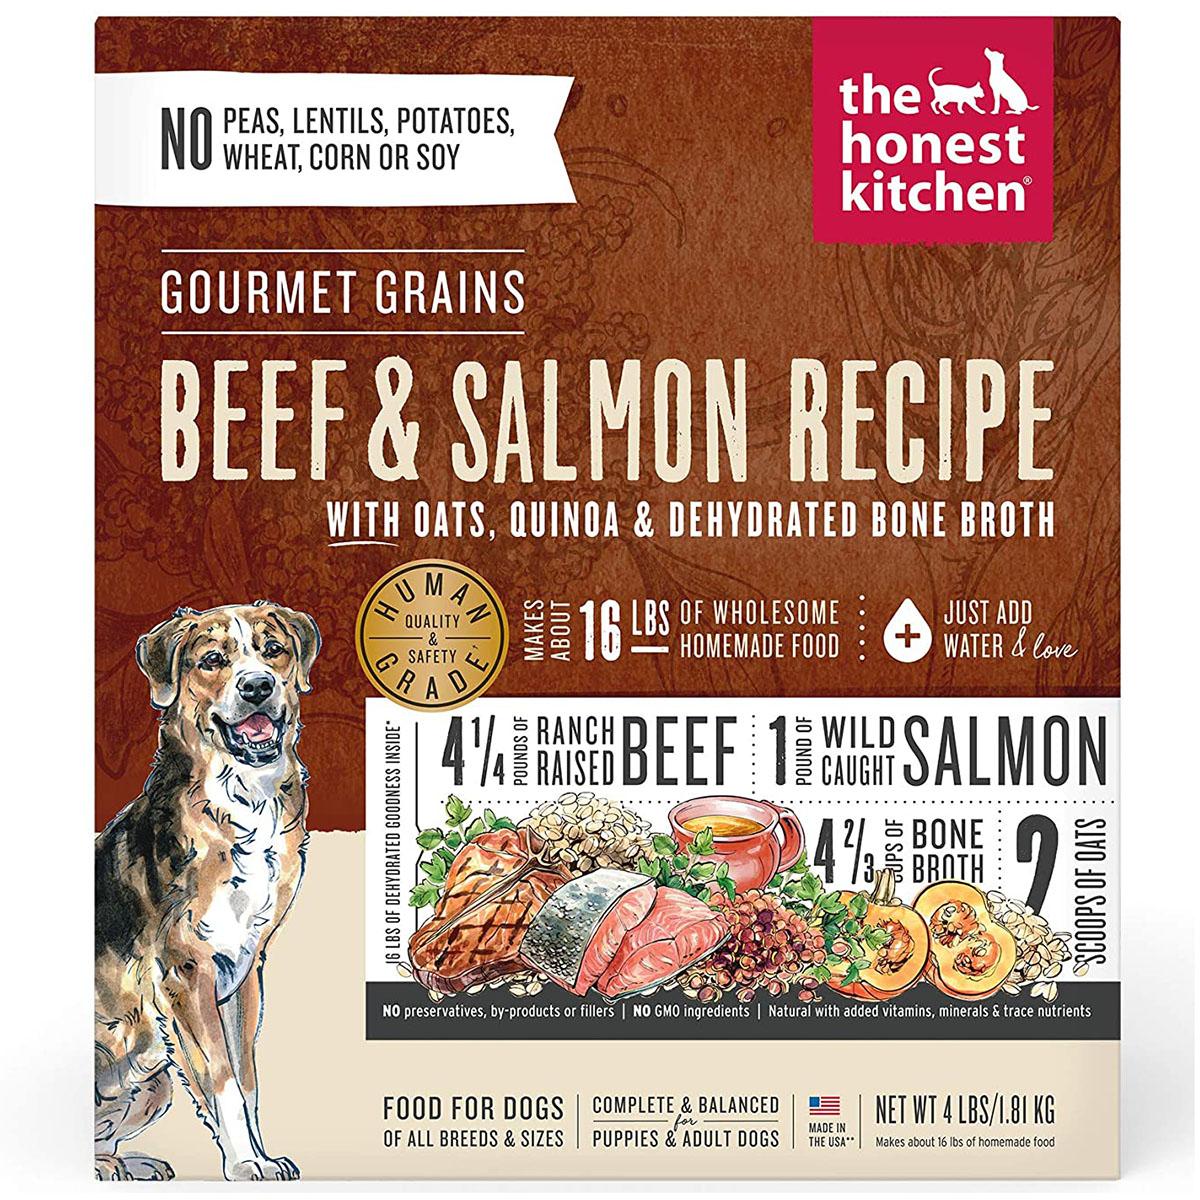 The Honest Kitchen Gourmet Grains Beef & Salmon Recipe Dehydrated Dog Food 